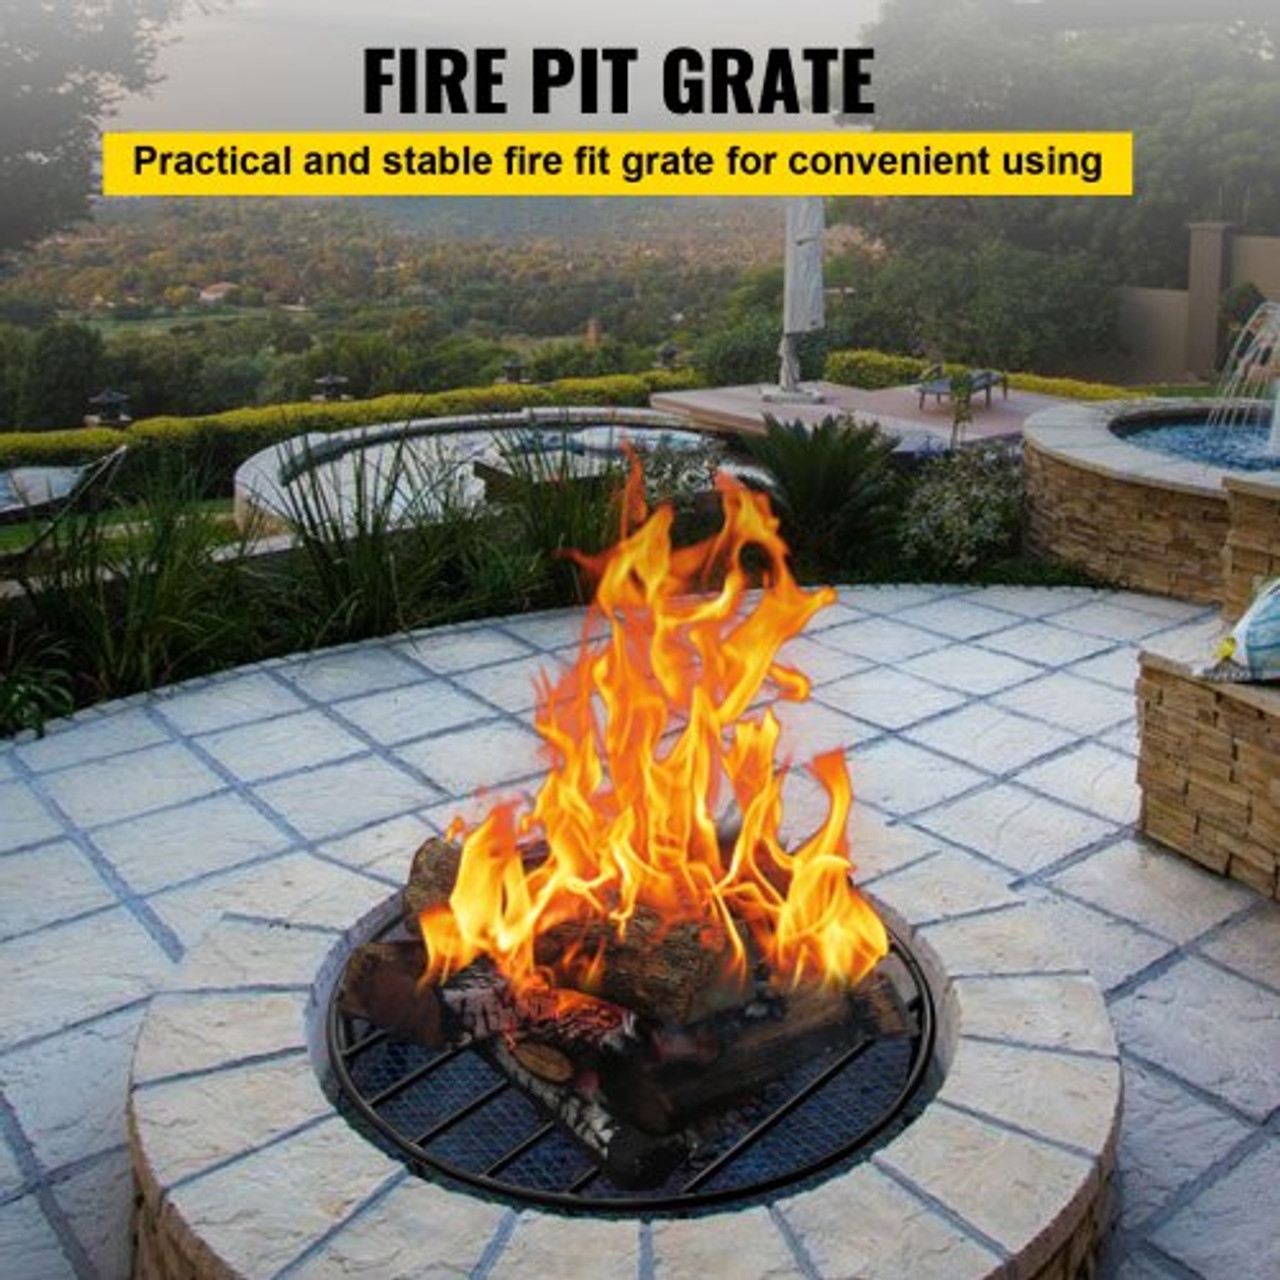 Fire Pit Grate, Heavy Duty Iron Round Firewood Grate, Round Wood Fire Pit Grate 22", Firepit Grate with Black Paint, Fire Grate with 4 Removable Round Legs for Burning Fireplace and Firepits